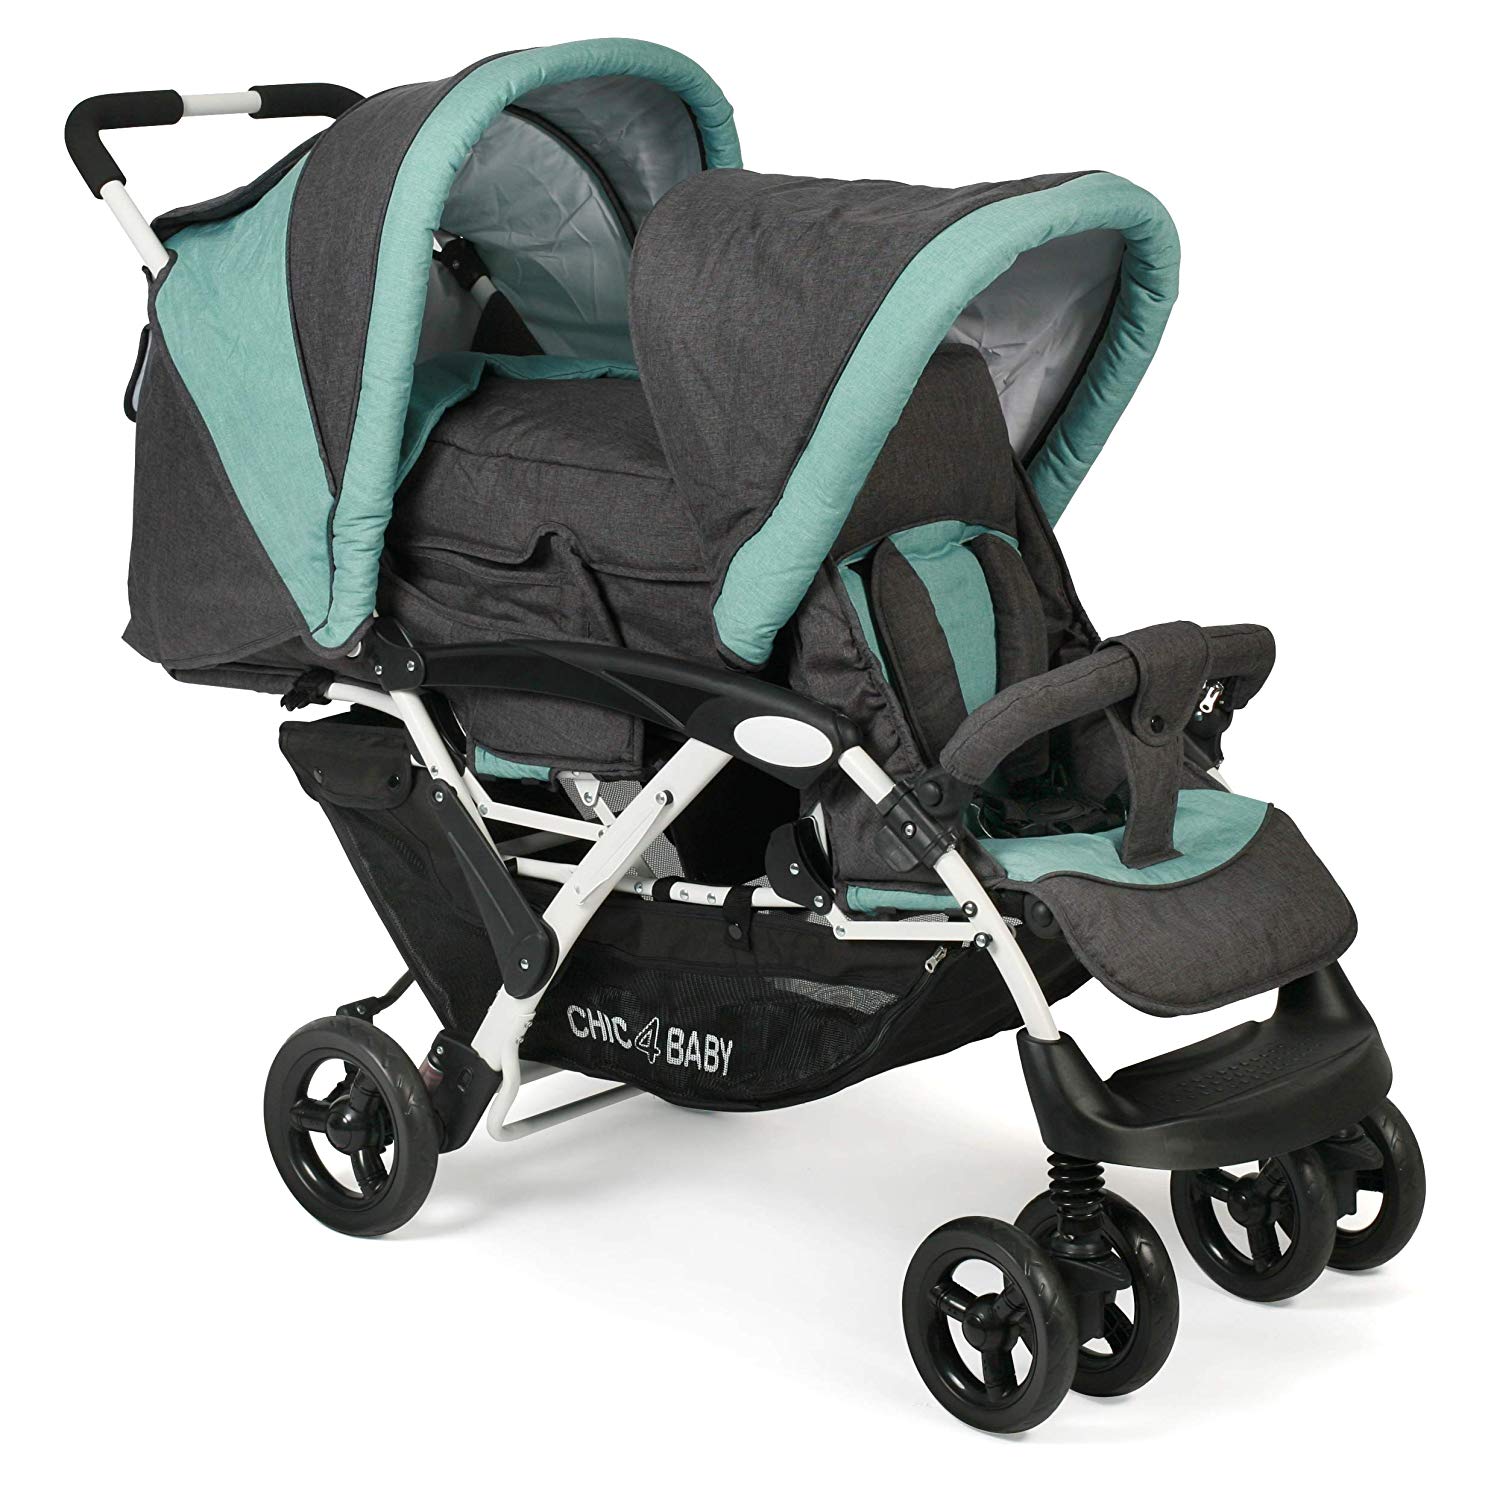 CHIC 4 BABY Duo Double Pushchair with Carry Bag for Two Children Melange Anthracite Mint Grey